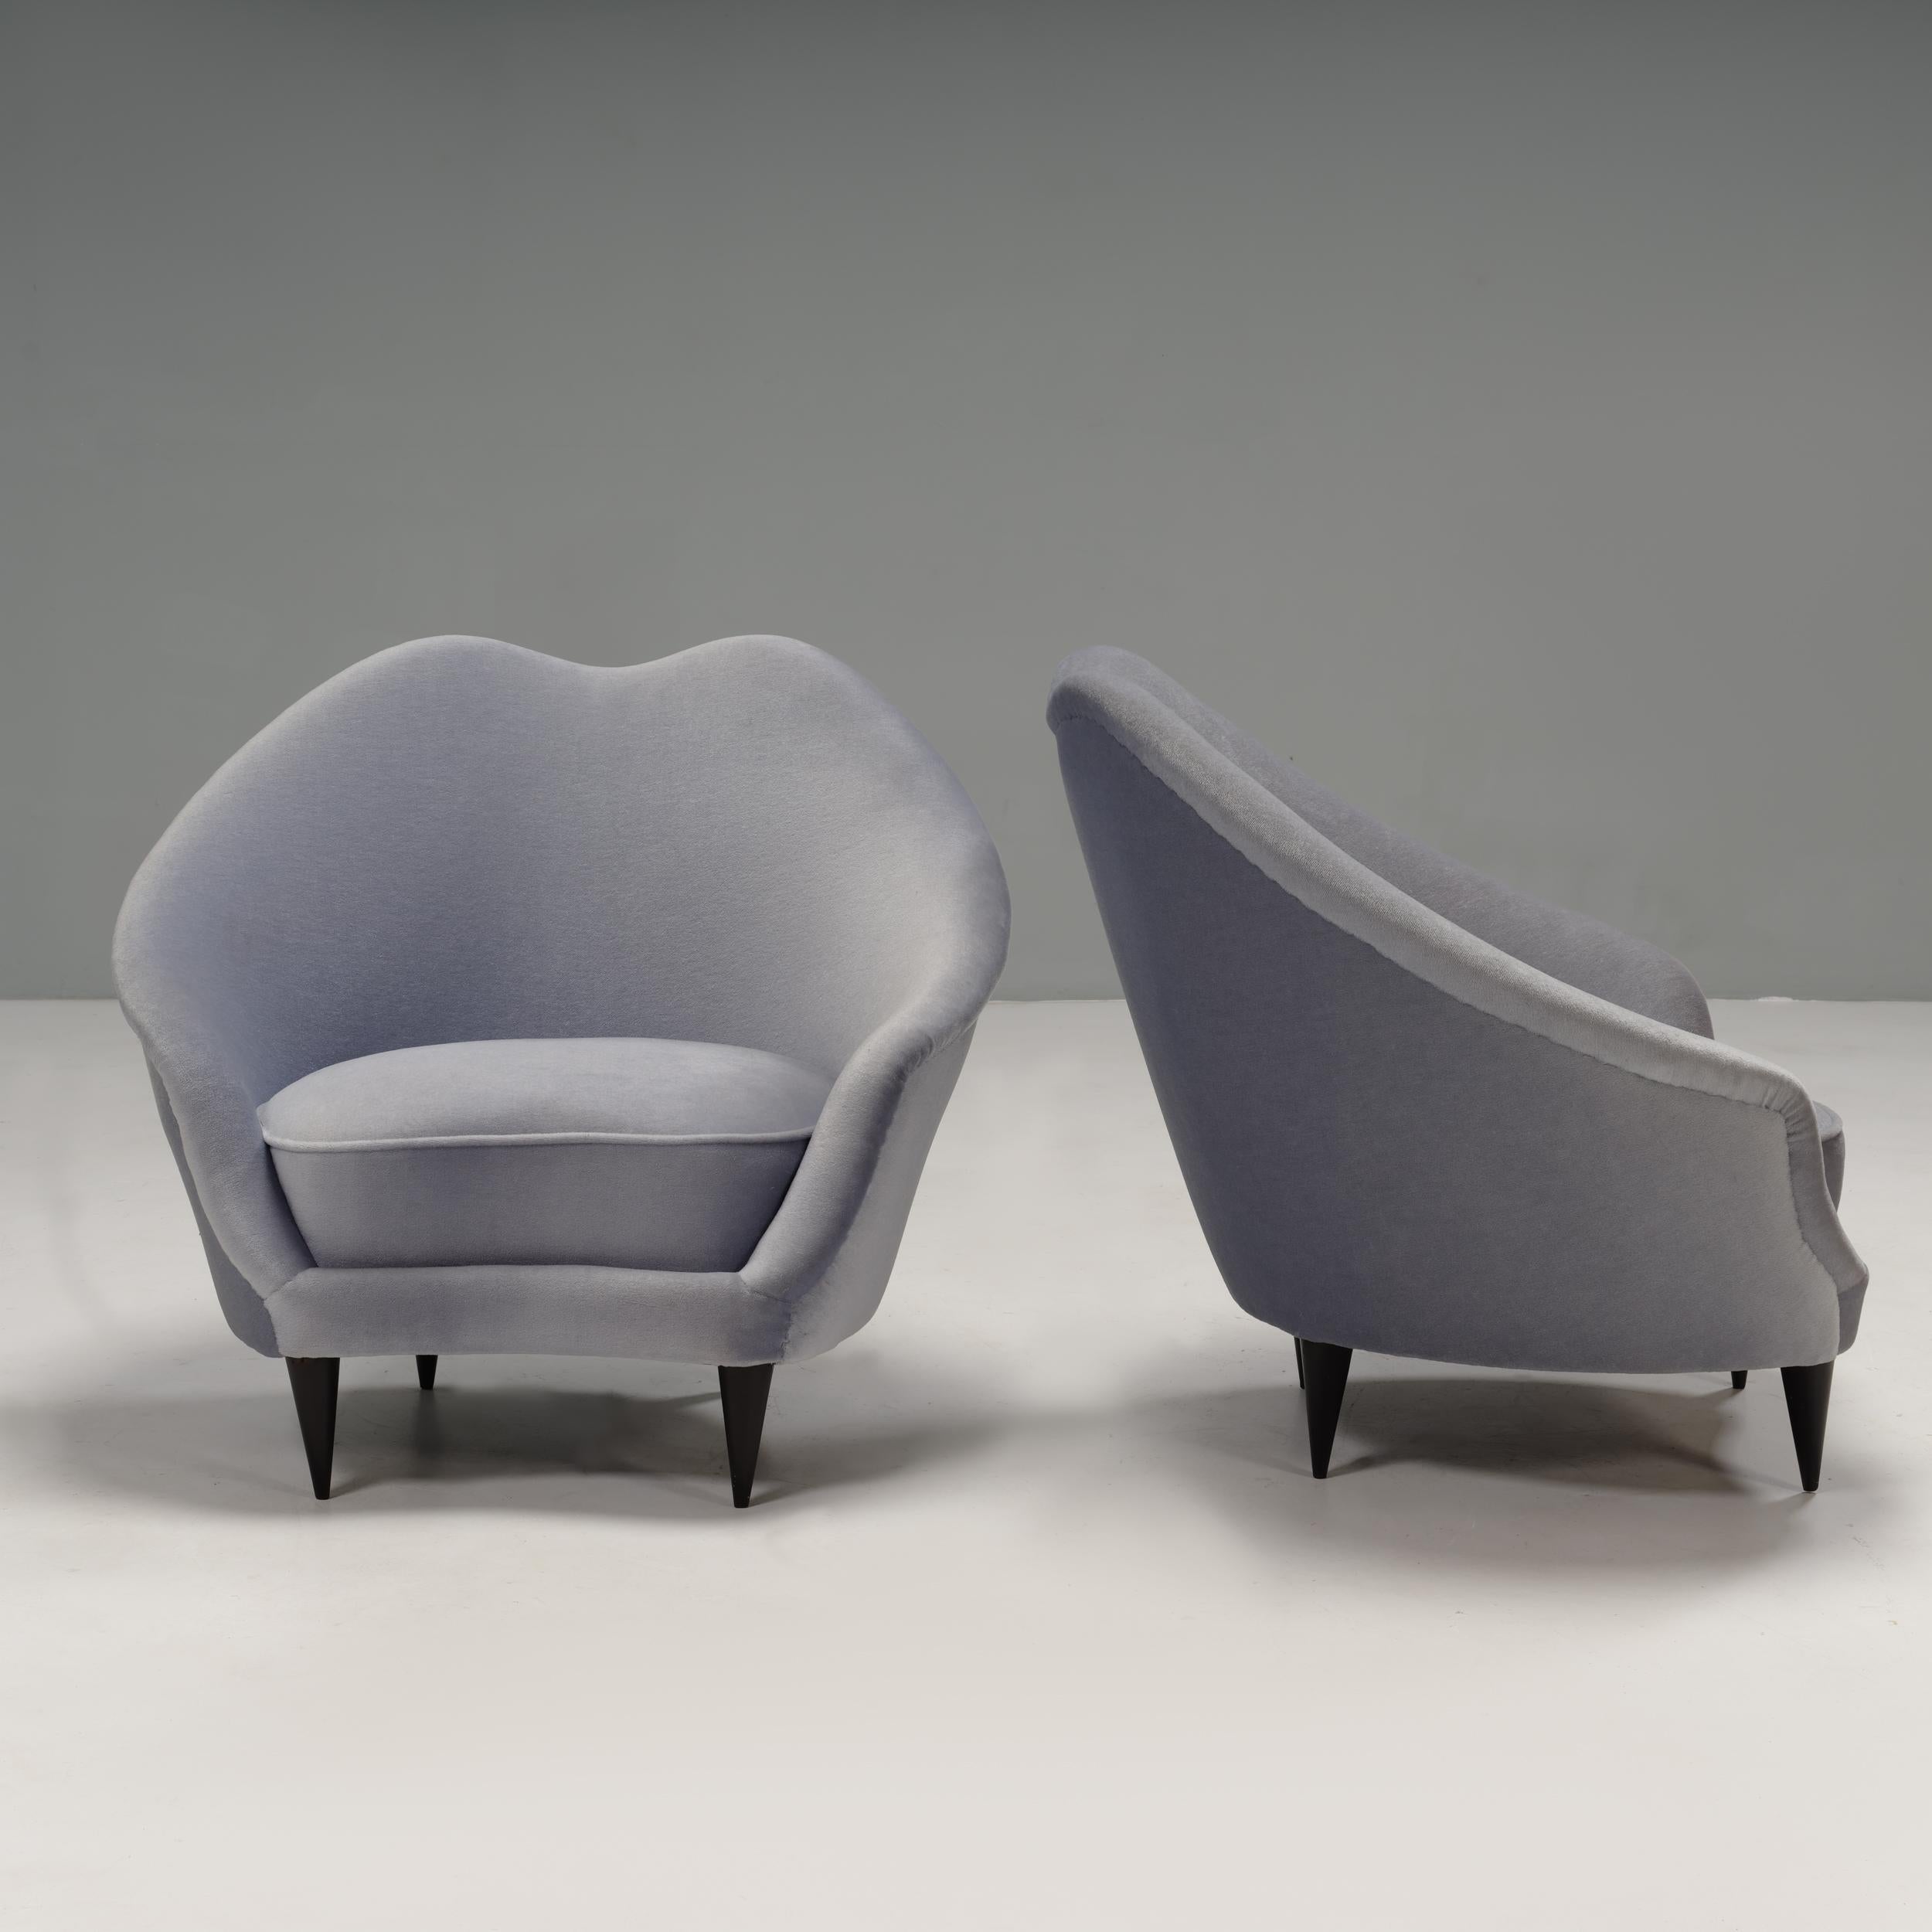 A stunning example of classic 1950s Italian design, these cocktail chairs were designed by Ico Parisi.

The armchairs feature a sculptural shape with a curved seat cushion and dipped backrest.

Both chairs are fully upholstered in pale blue Bruno